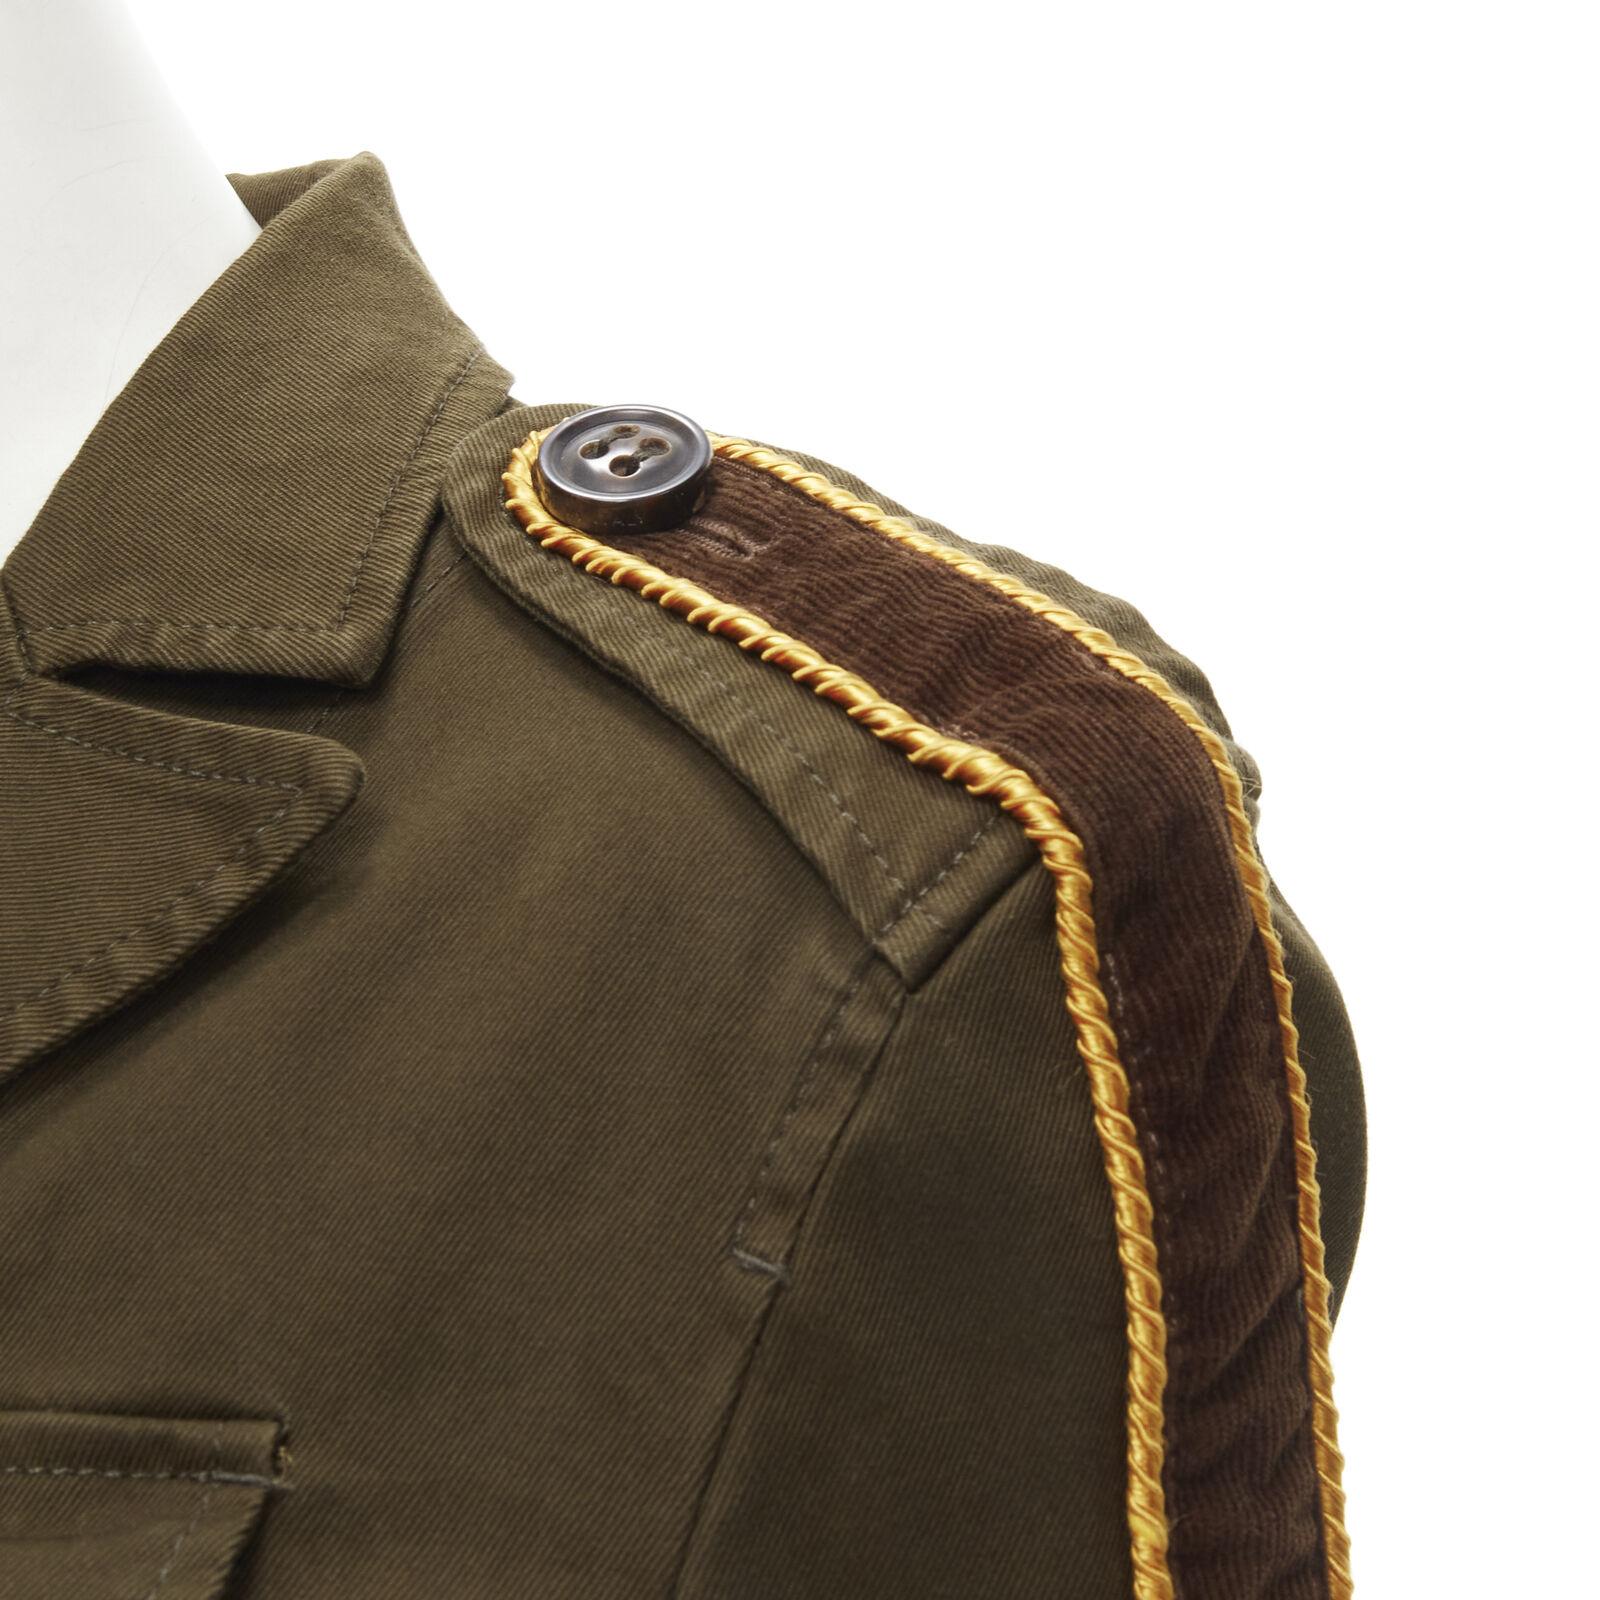 DSQUARED2 2021 green cotton military officer corduroy  utility jacket IT36 XS
Reference: AAWC/A00117
Brand: Dsquared2
Material: Cotton
Color: Green, Brown
Pattern: Solid
Closure: Button
Lining: Unlined
Extra Details: Military dark green cotton.